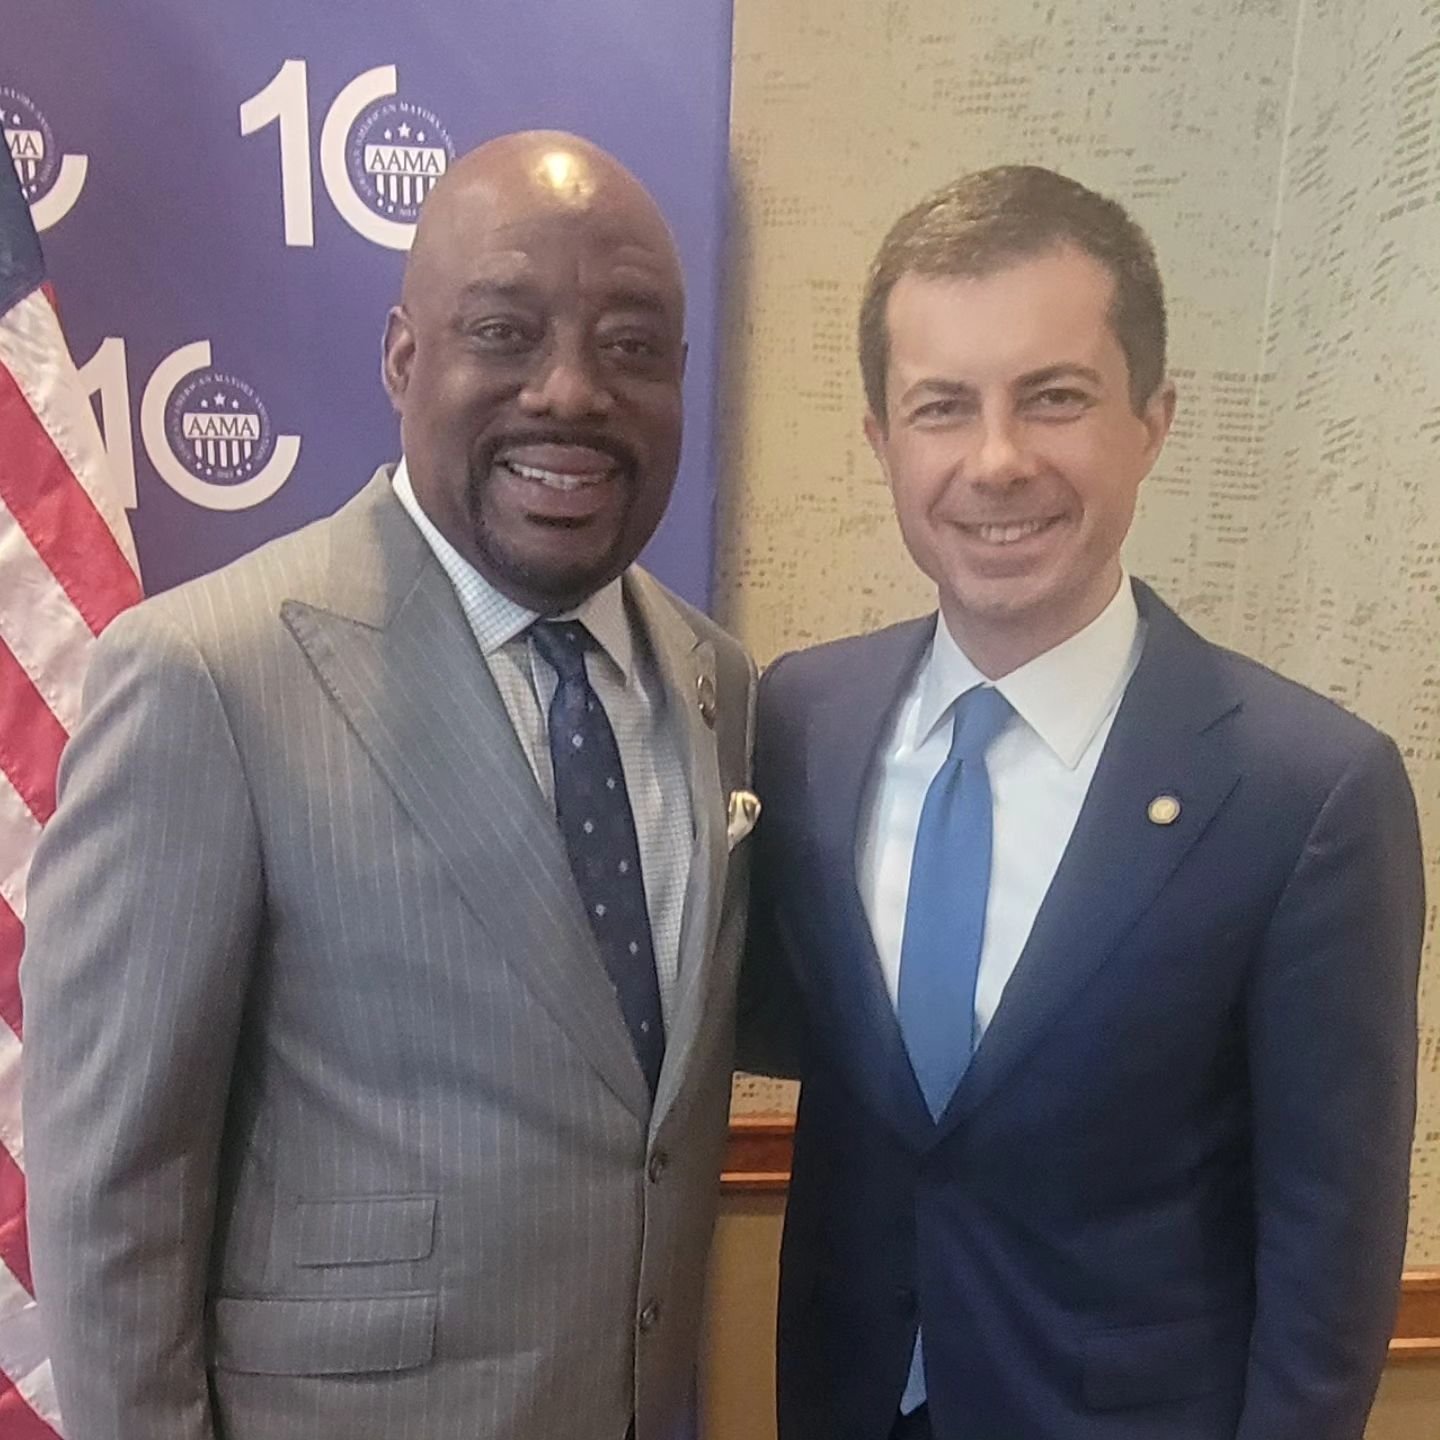 On Friday, I was happy to meet with Secretary Pete Buttigieg at the African American Mayors Association Conference to thank him and the #BidenAdministration for Savannah's $1.8 million Reconnecting Communities and Neighborhoods planning grant to remo